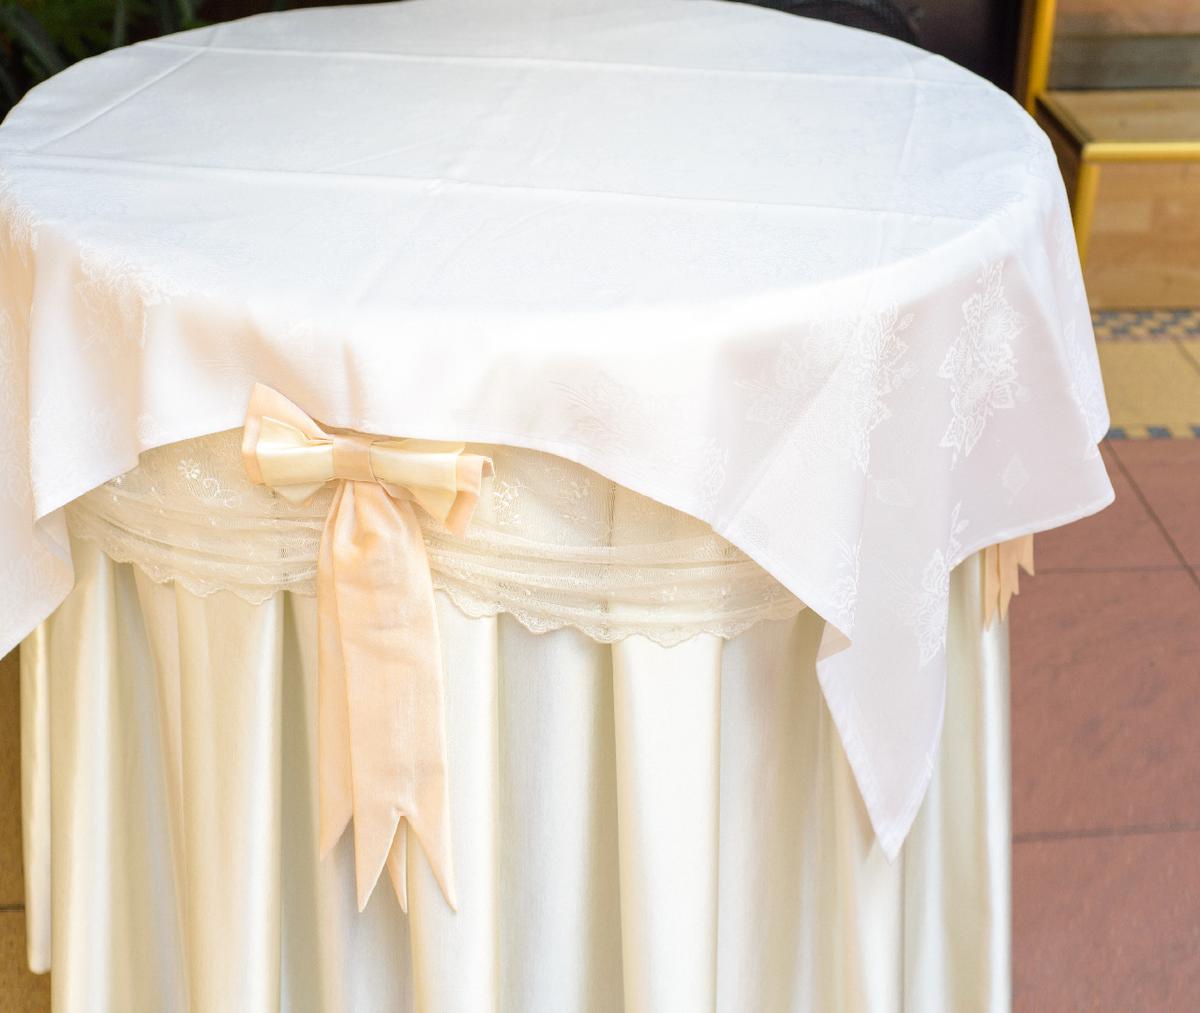 Tablecloth cleaning service